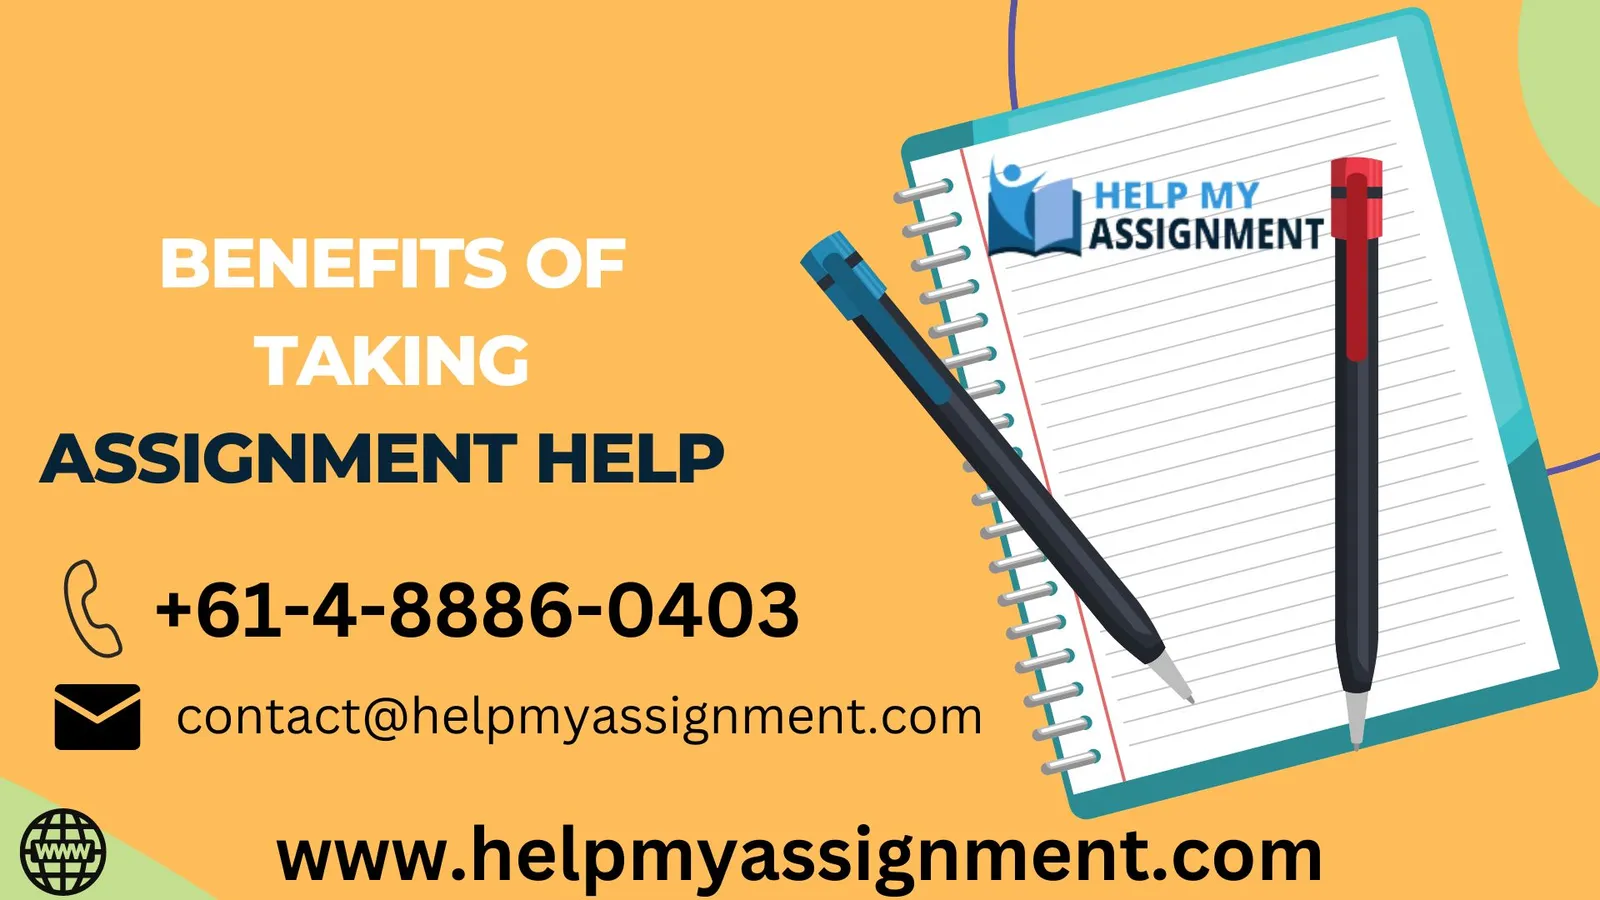 Benefits Of Taking Assignment Help For Psychology 